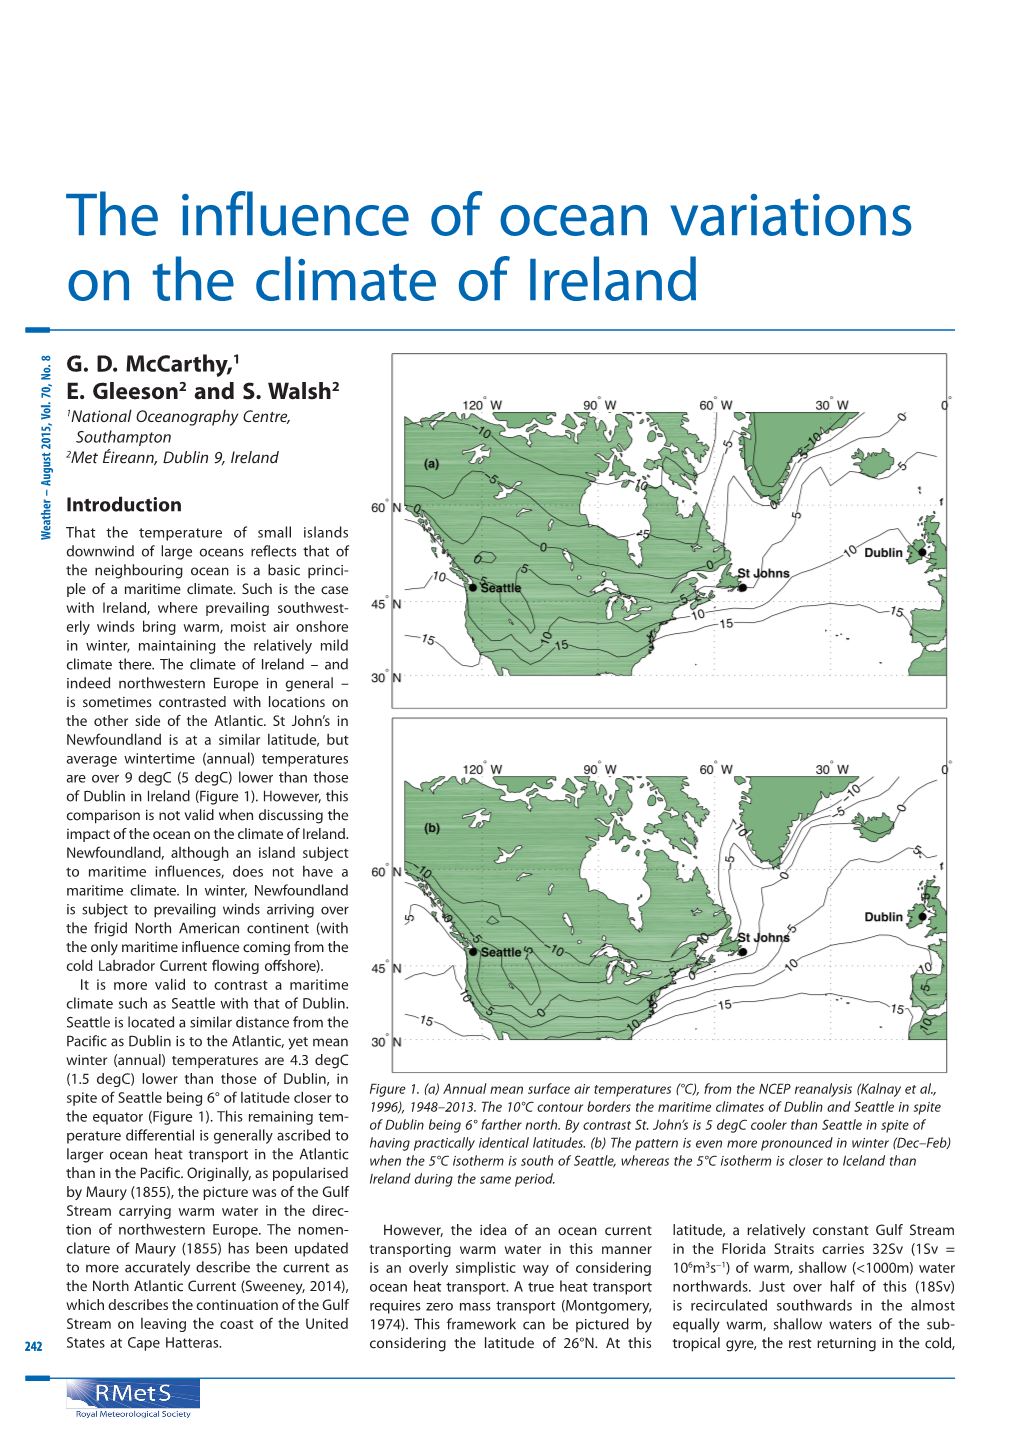 The Influence of Ocean Variations on the Climate of Ireland